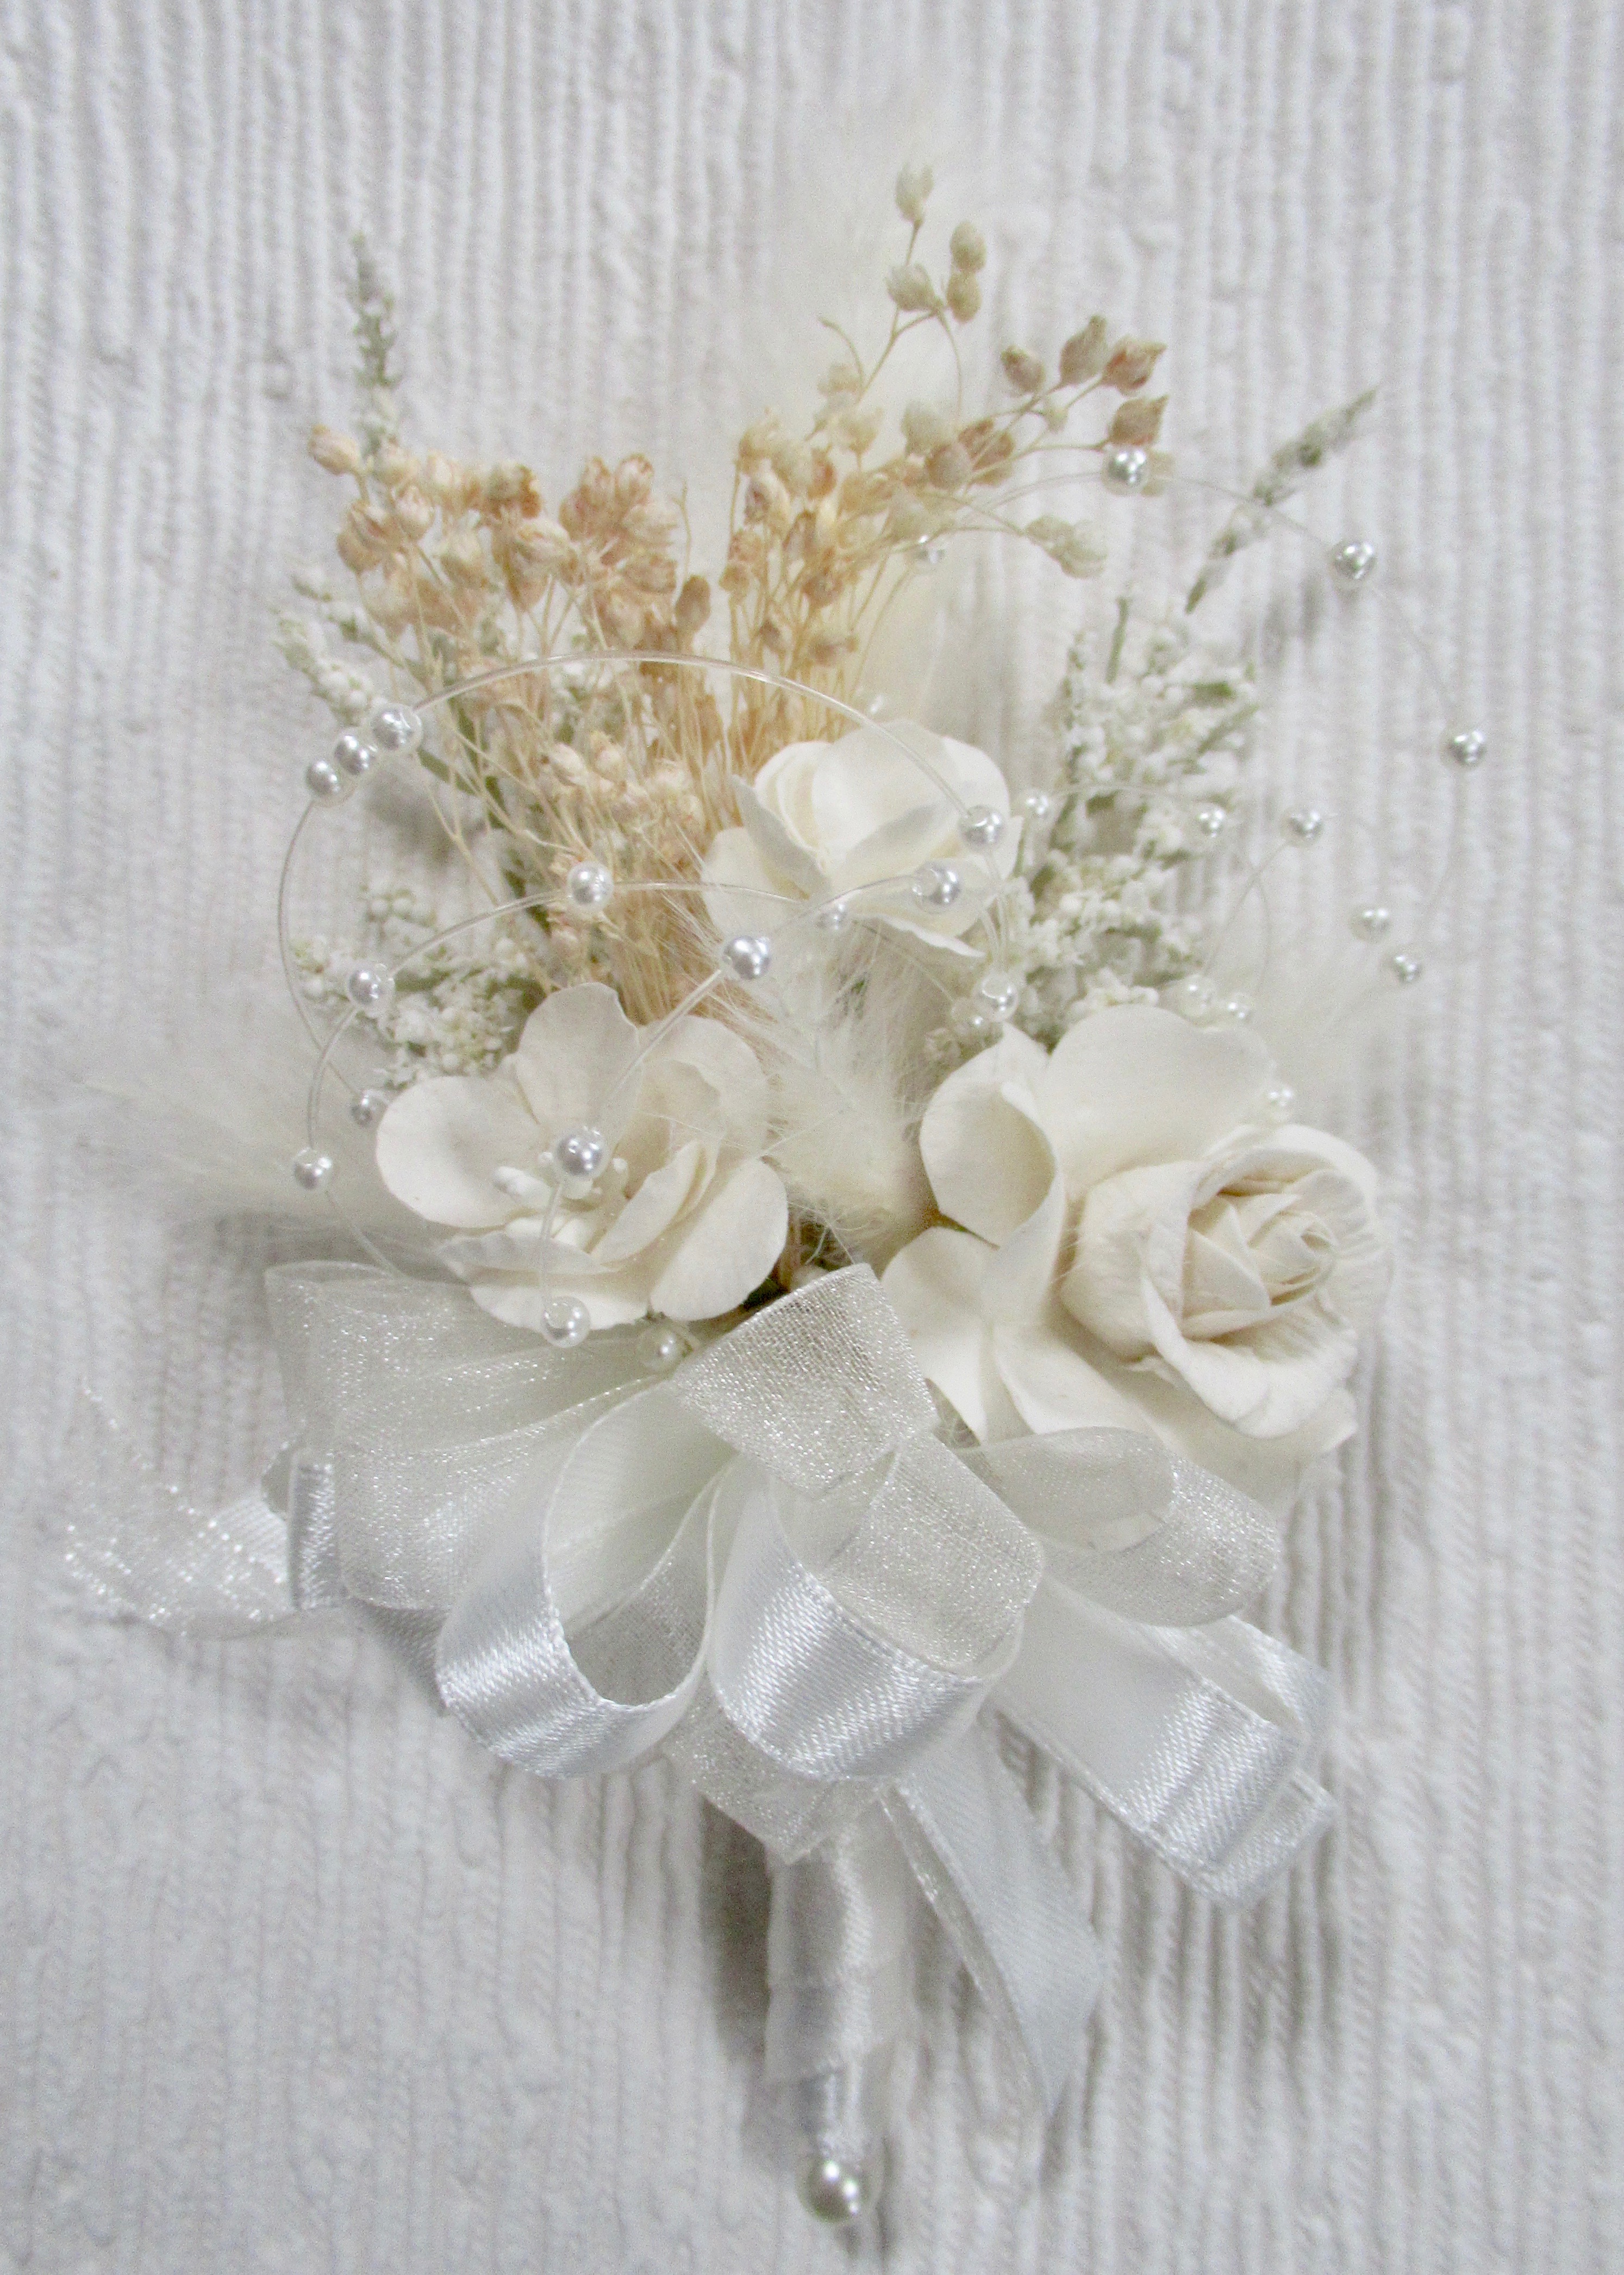 Dried Flower Corsage for weddings